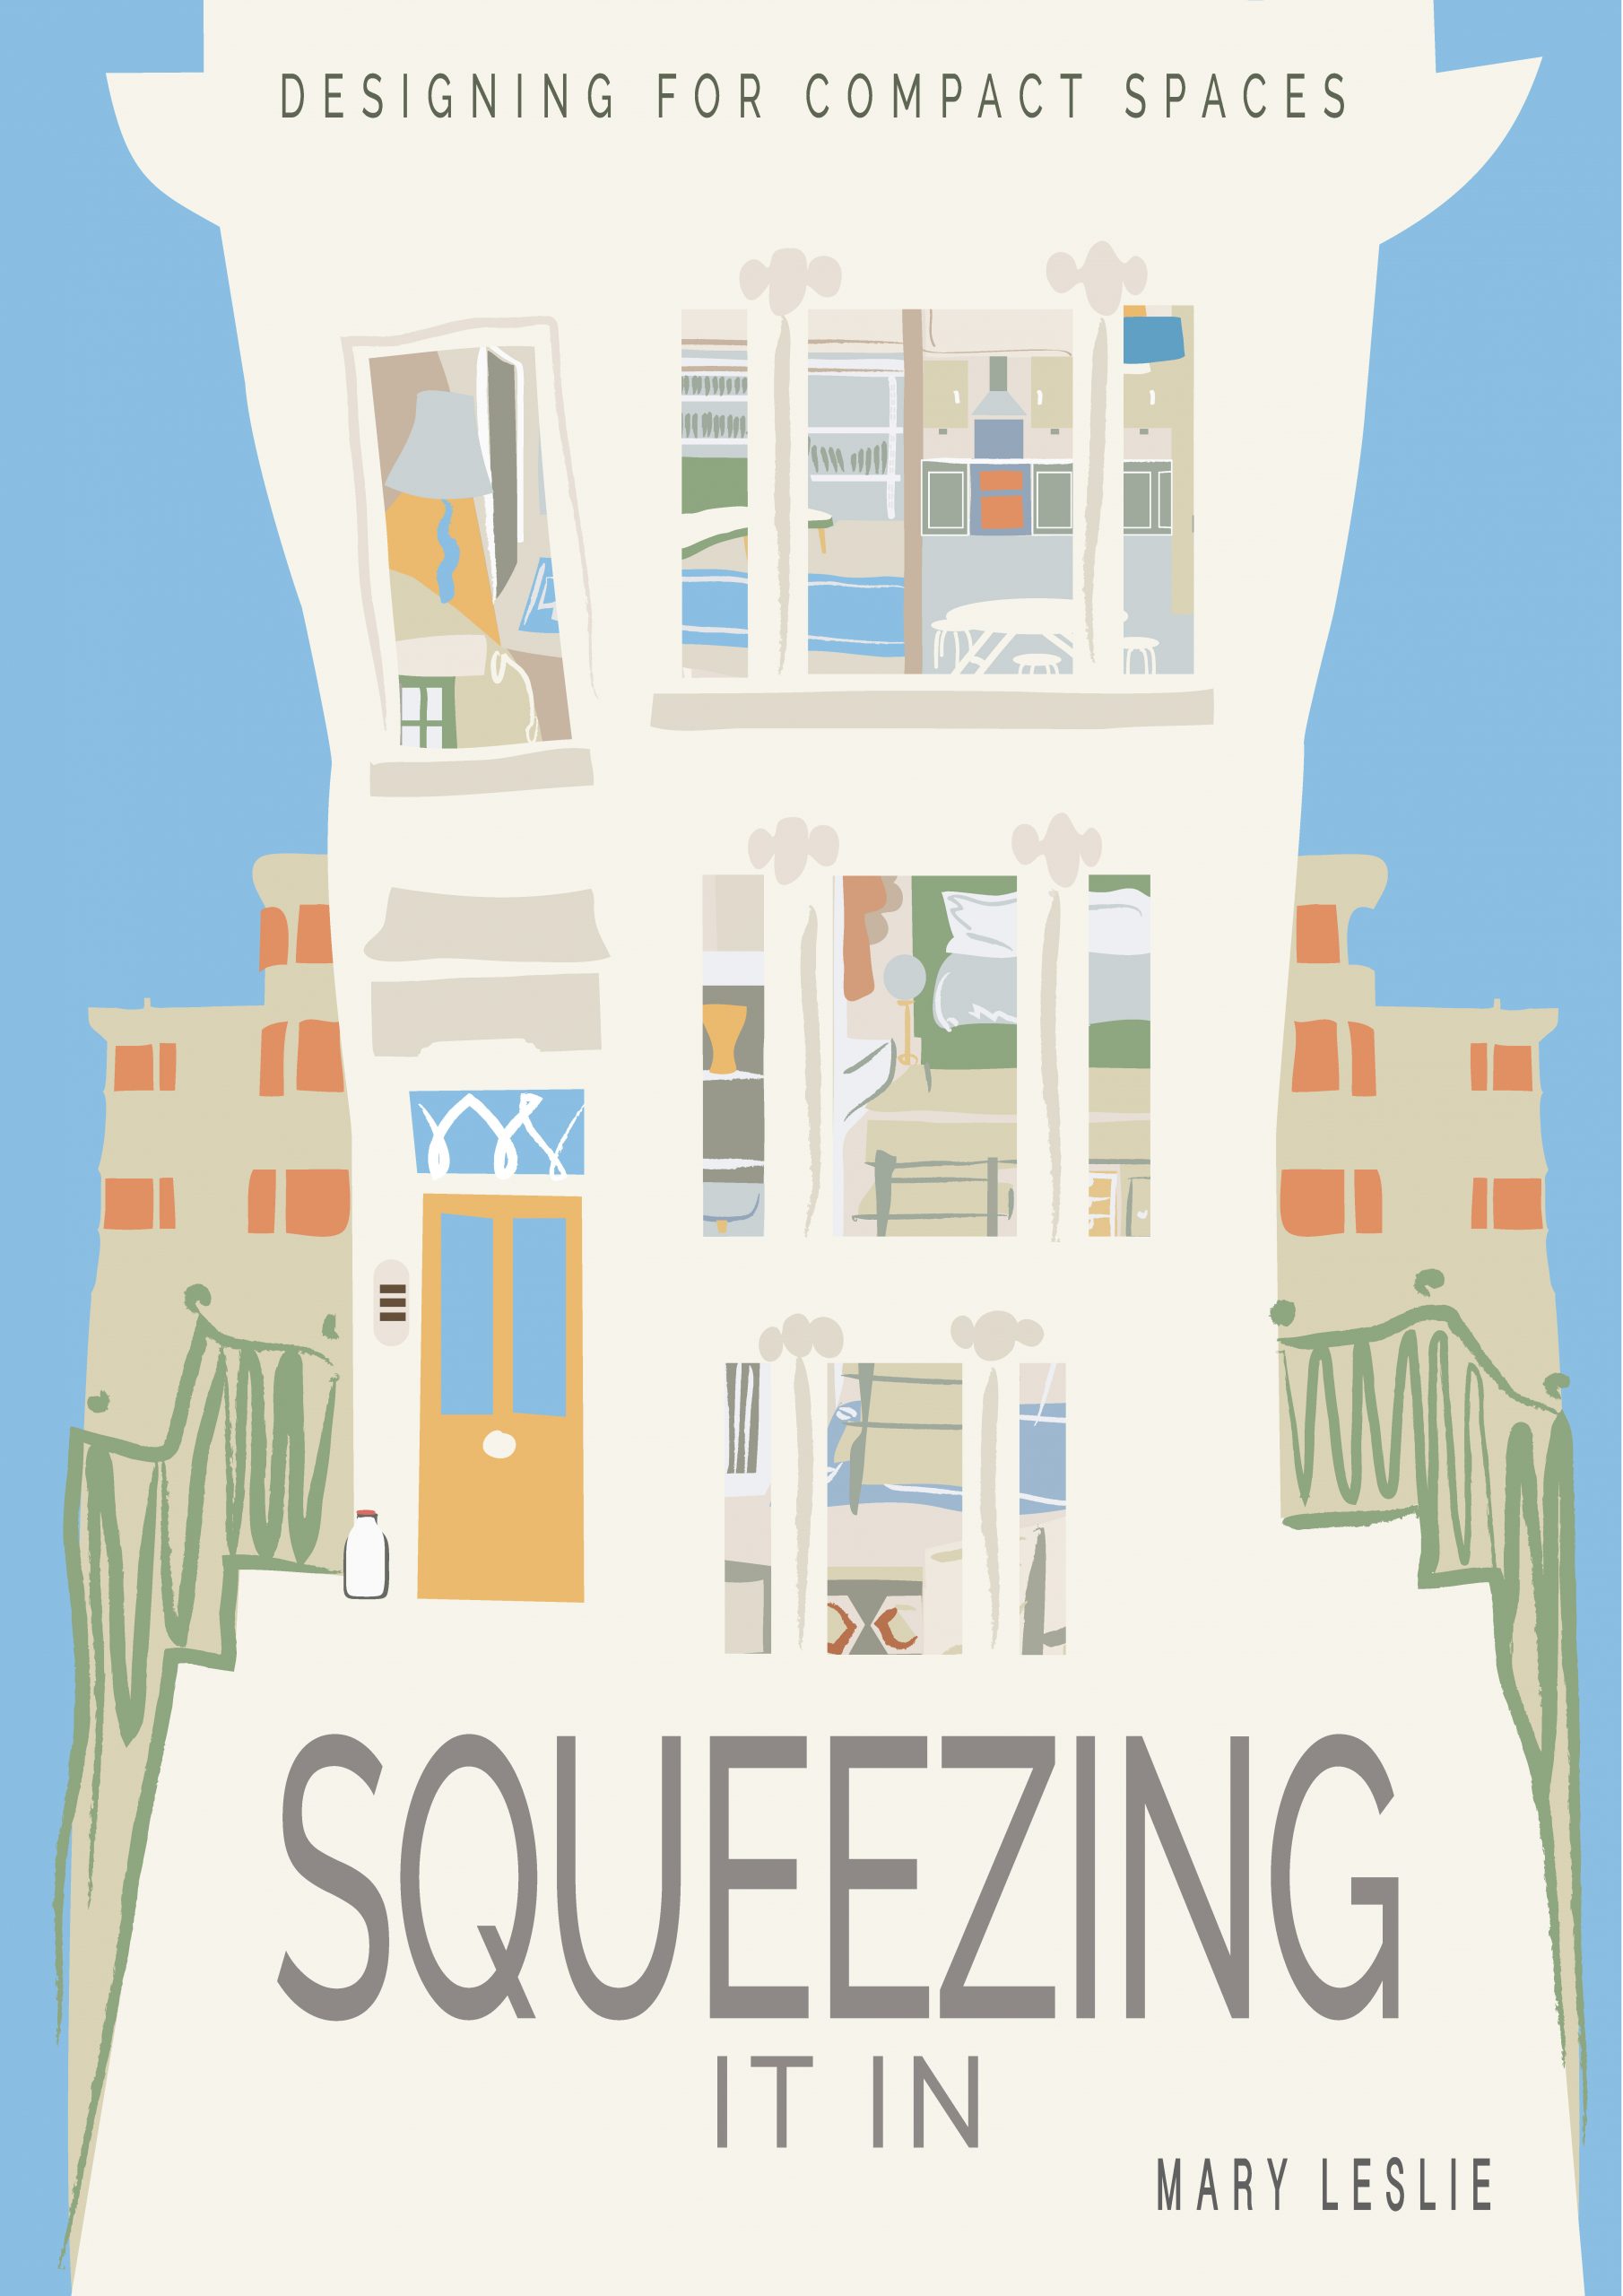 New from RIBA Books: Squeezing It In: the go-to guide for designers seeking inspiration for compact living spaces @RIBABooks @RIBA